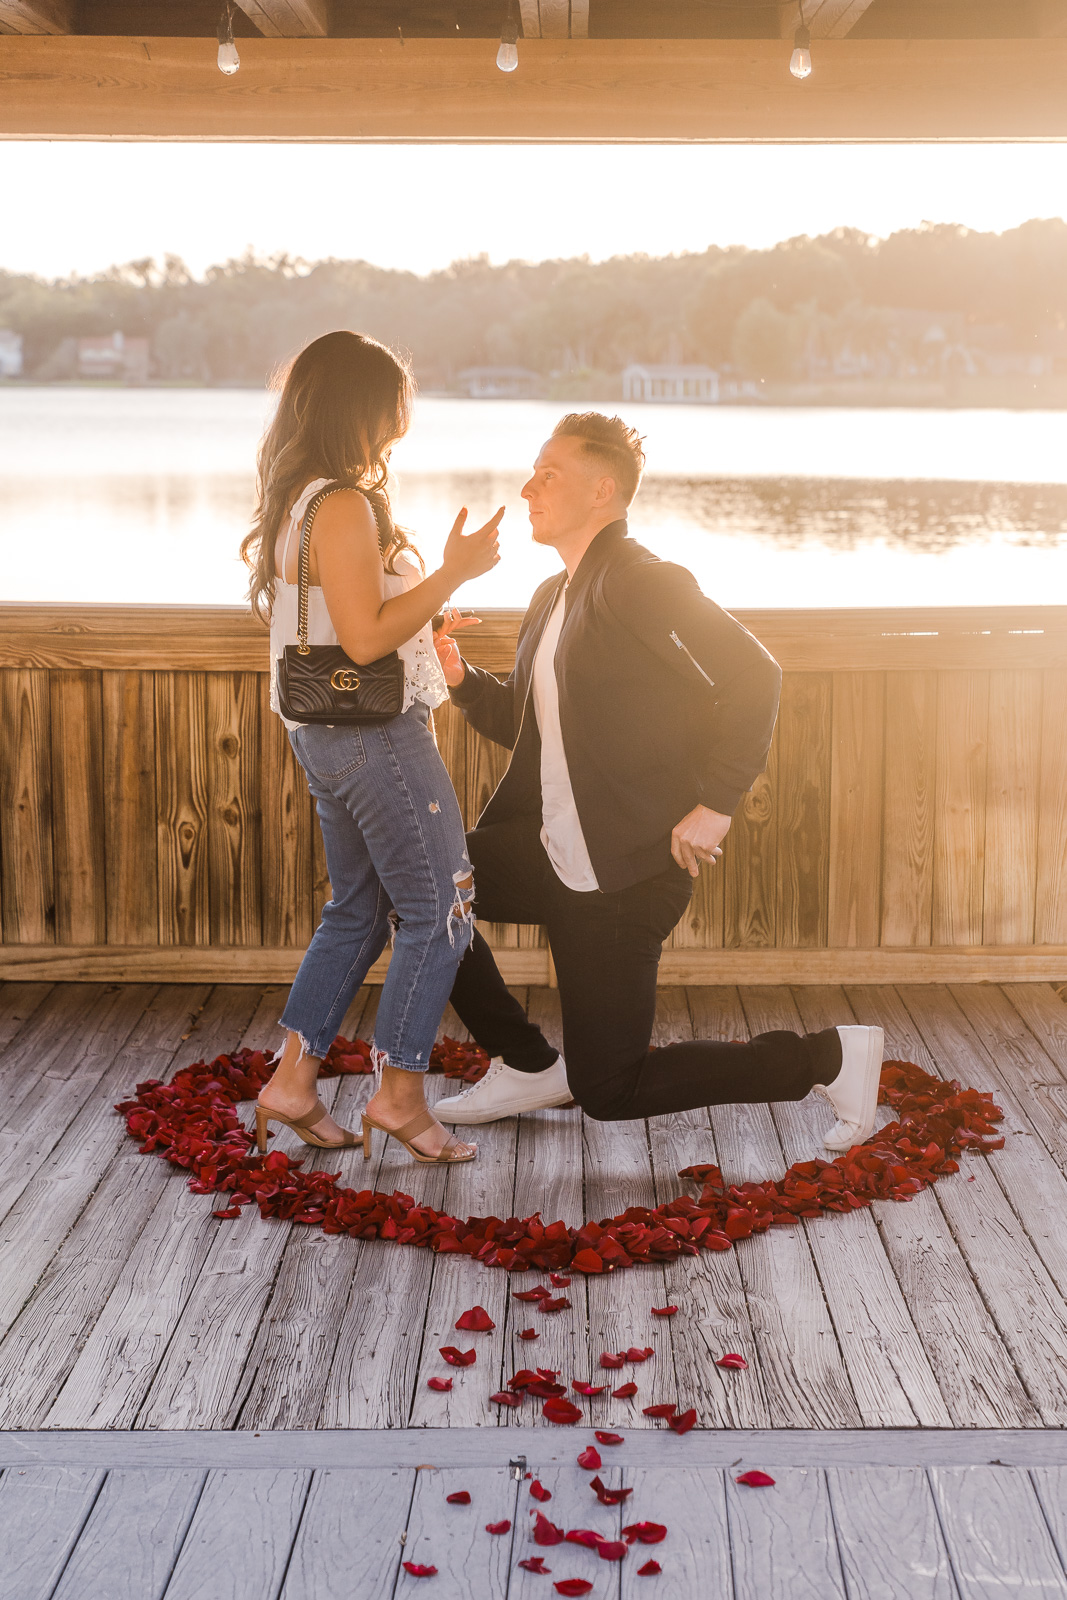 Surprise proposal photography at Enzo's on the Lake in Orlando, Florida